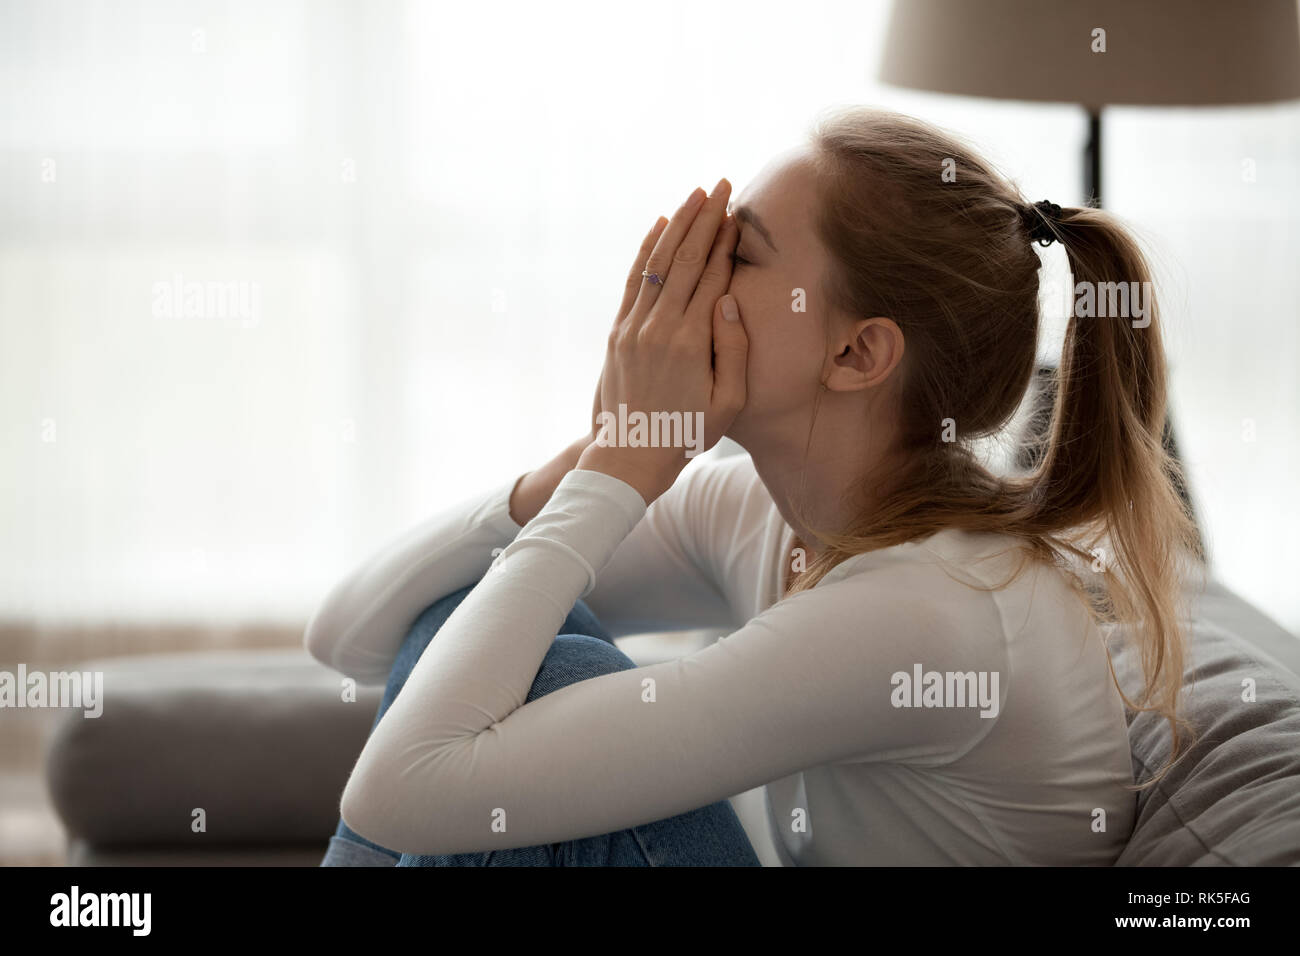 Depressed upset young woman crying alone at home Stock Photo